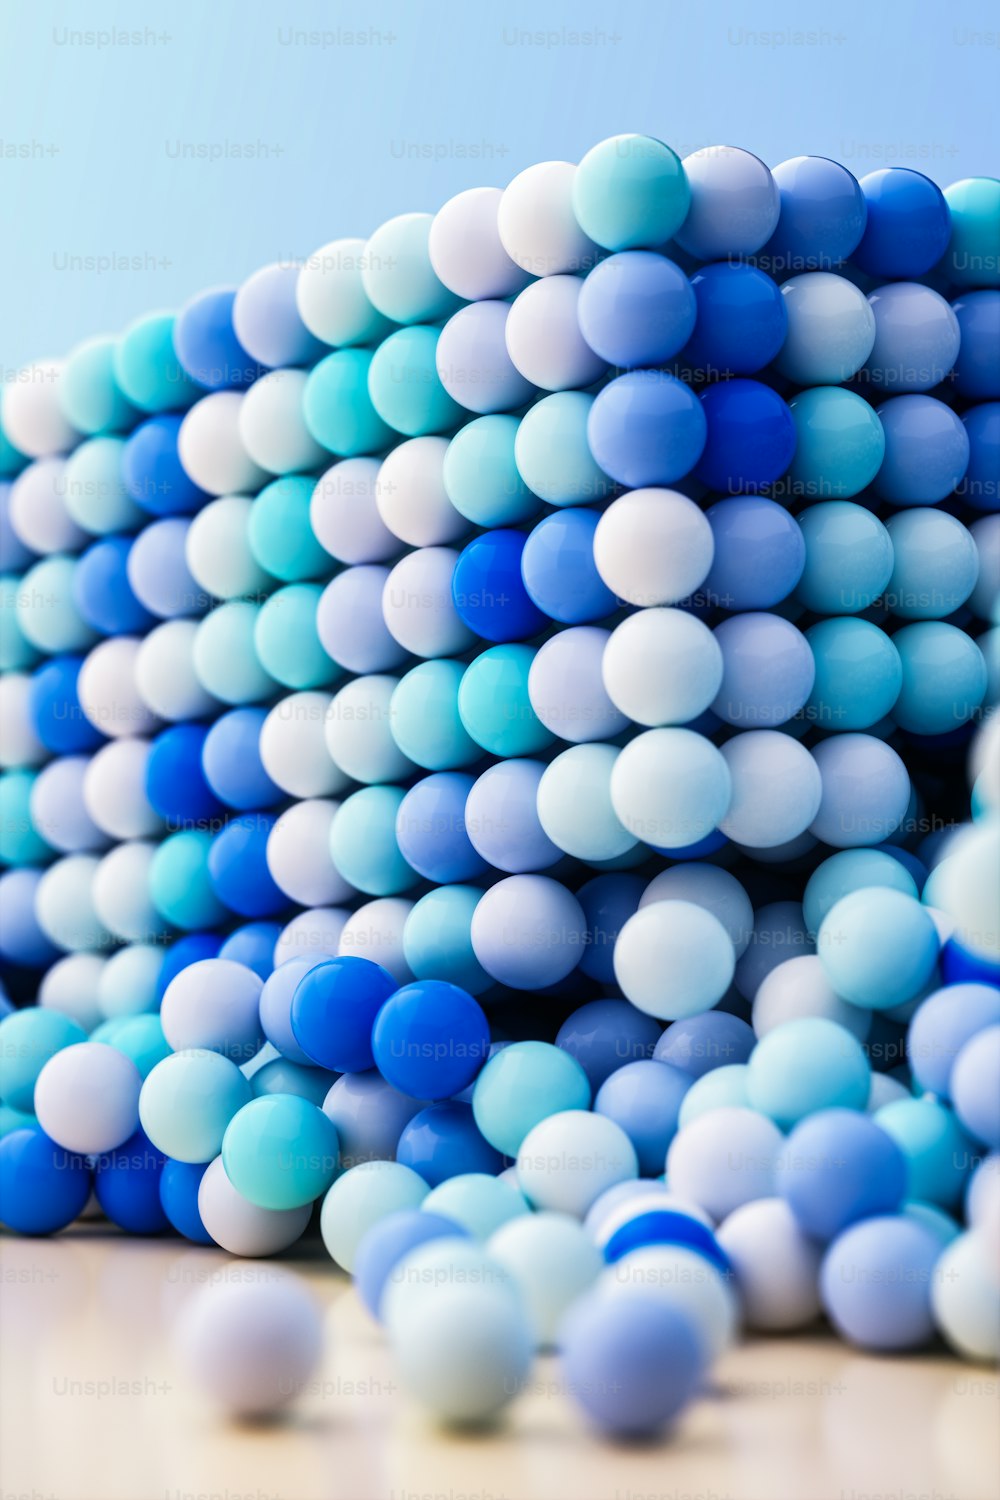 a pile of blue and white balloons on a table